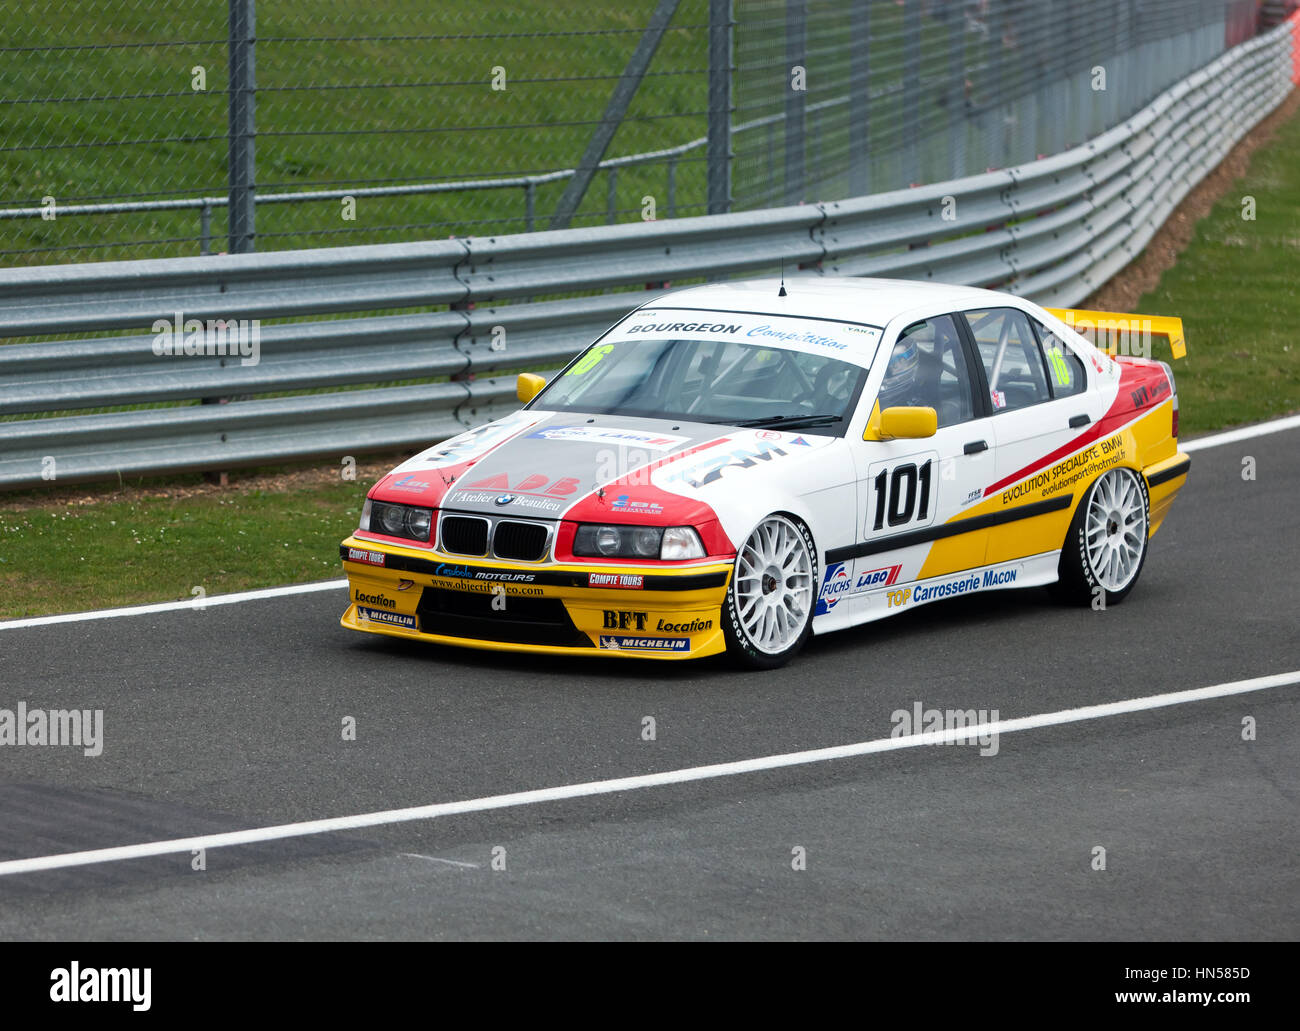 A 1997, BMW 320i, driven by Don Grice, enters the international pit lane during the Jet Super Touring Car Trophy, at the 2016 Silverstone Classic Stock Photo